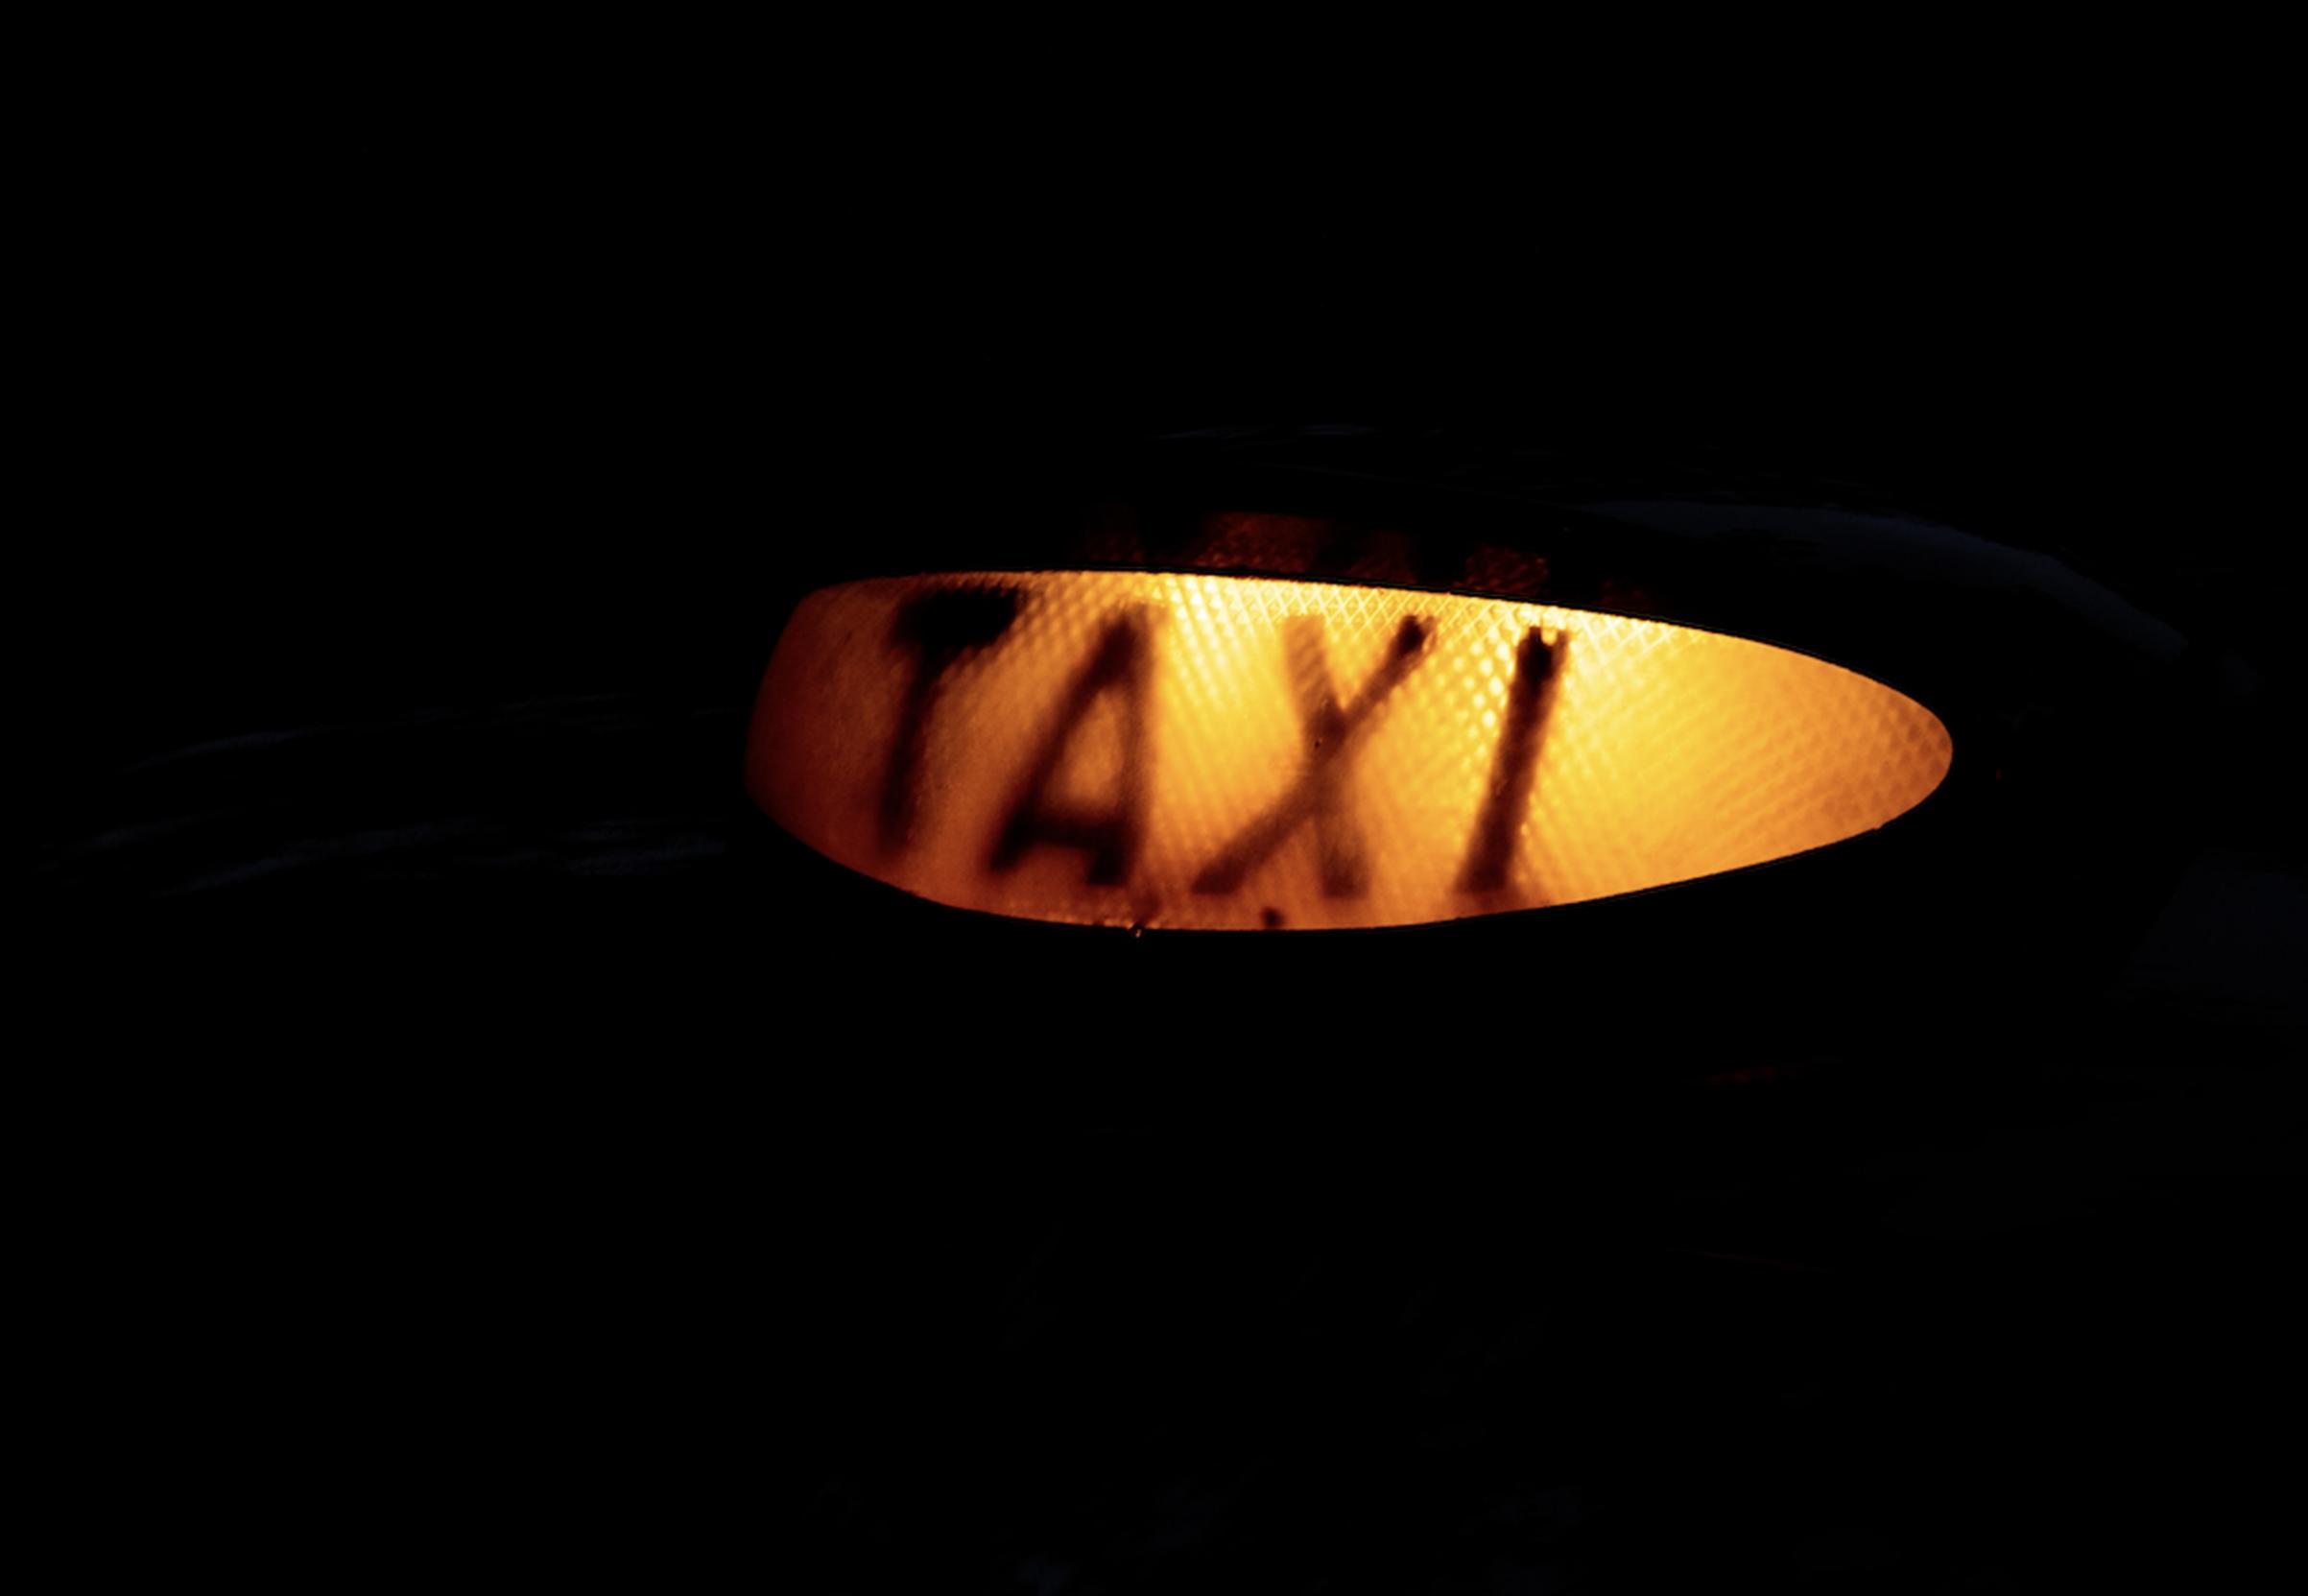 The Taxis and Private Hire Vehicles (Disabled Persons) Act 2022 amends the Equality Act 2010 to place duties on taxi drivers and PHV drivers and operators (The Blow Up/Unsplash)